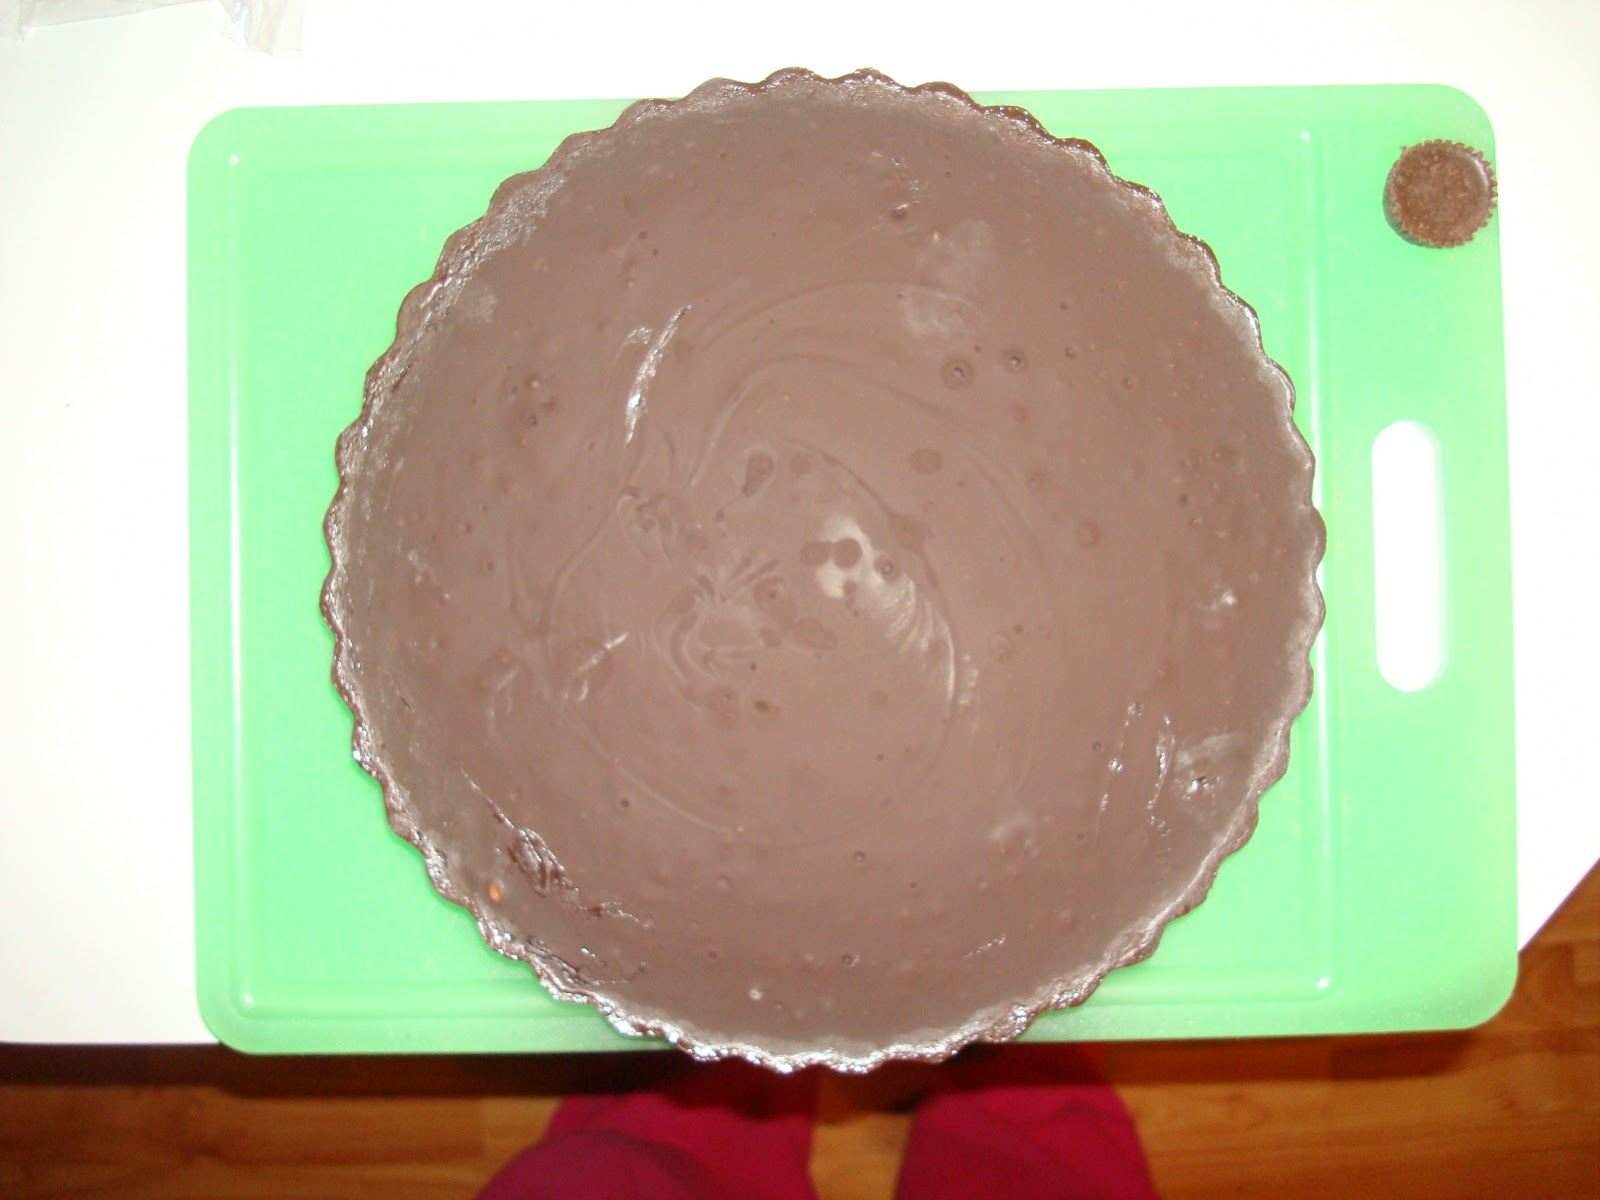 Cupcake at Home: Giant Reese's Peanut Butter Cup